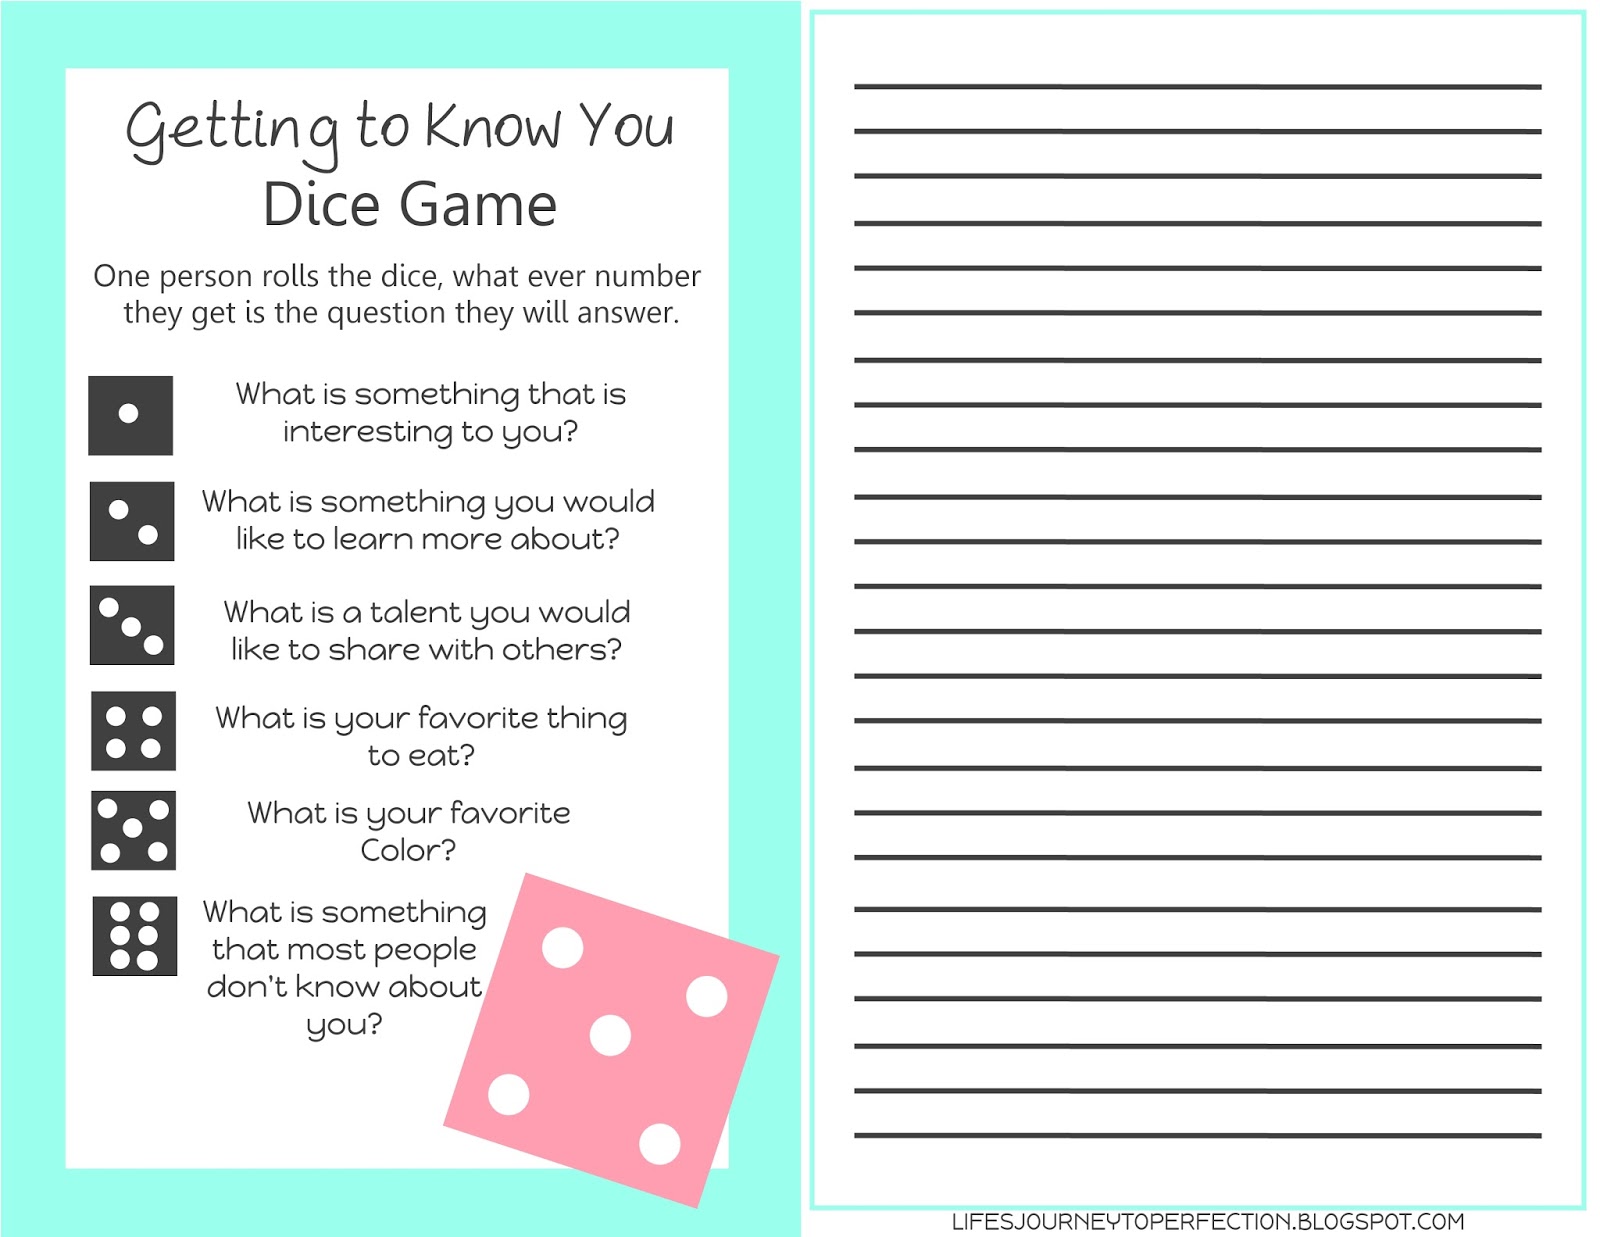 life-s-journey-to-perfection-getting-to-know-you-dice-game-printable